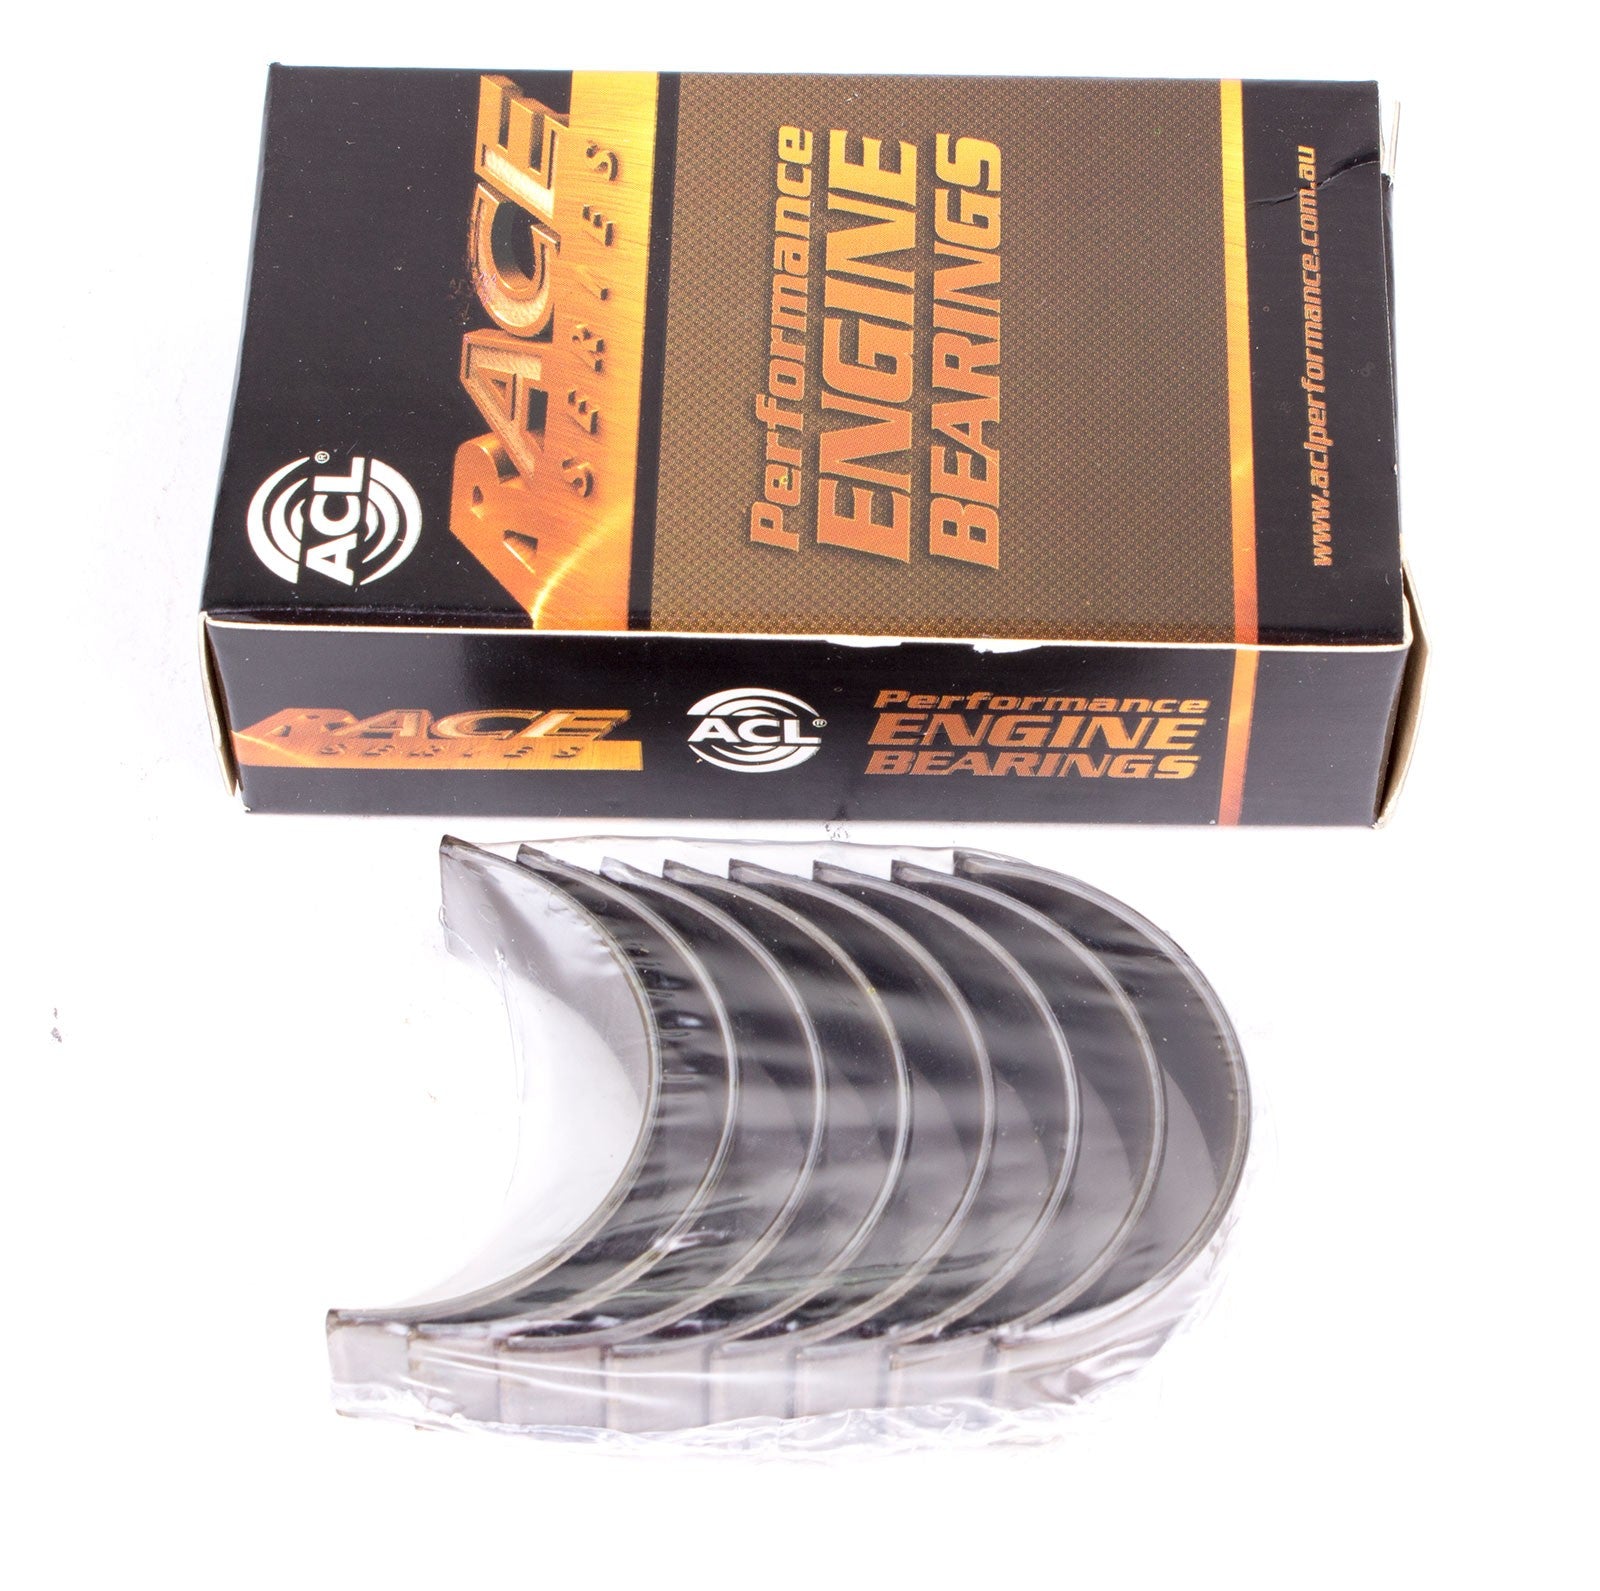 ACL 5M1117H-01 Main bearing set (ACL Race Series) Photo-0 